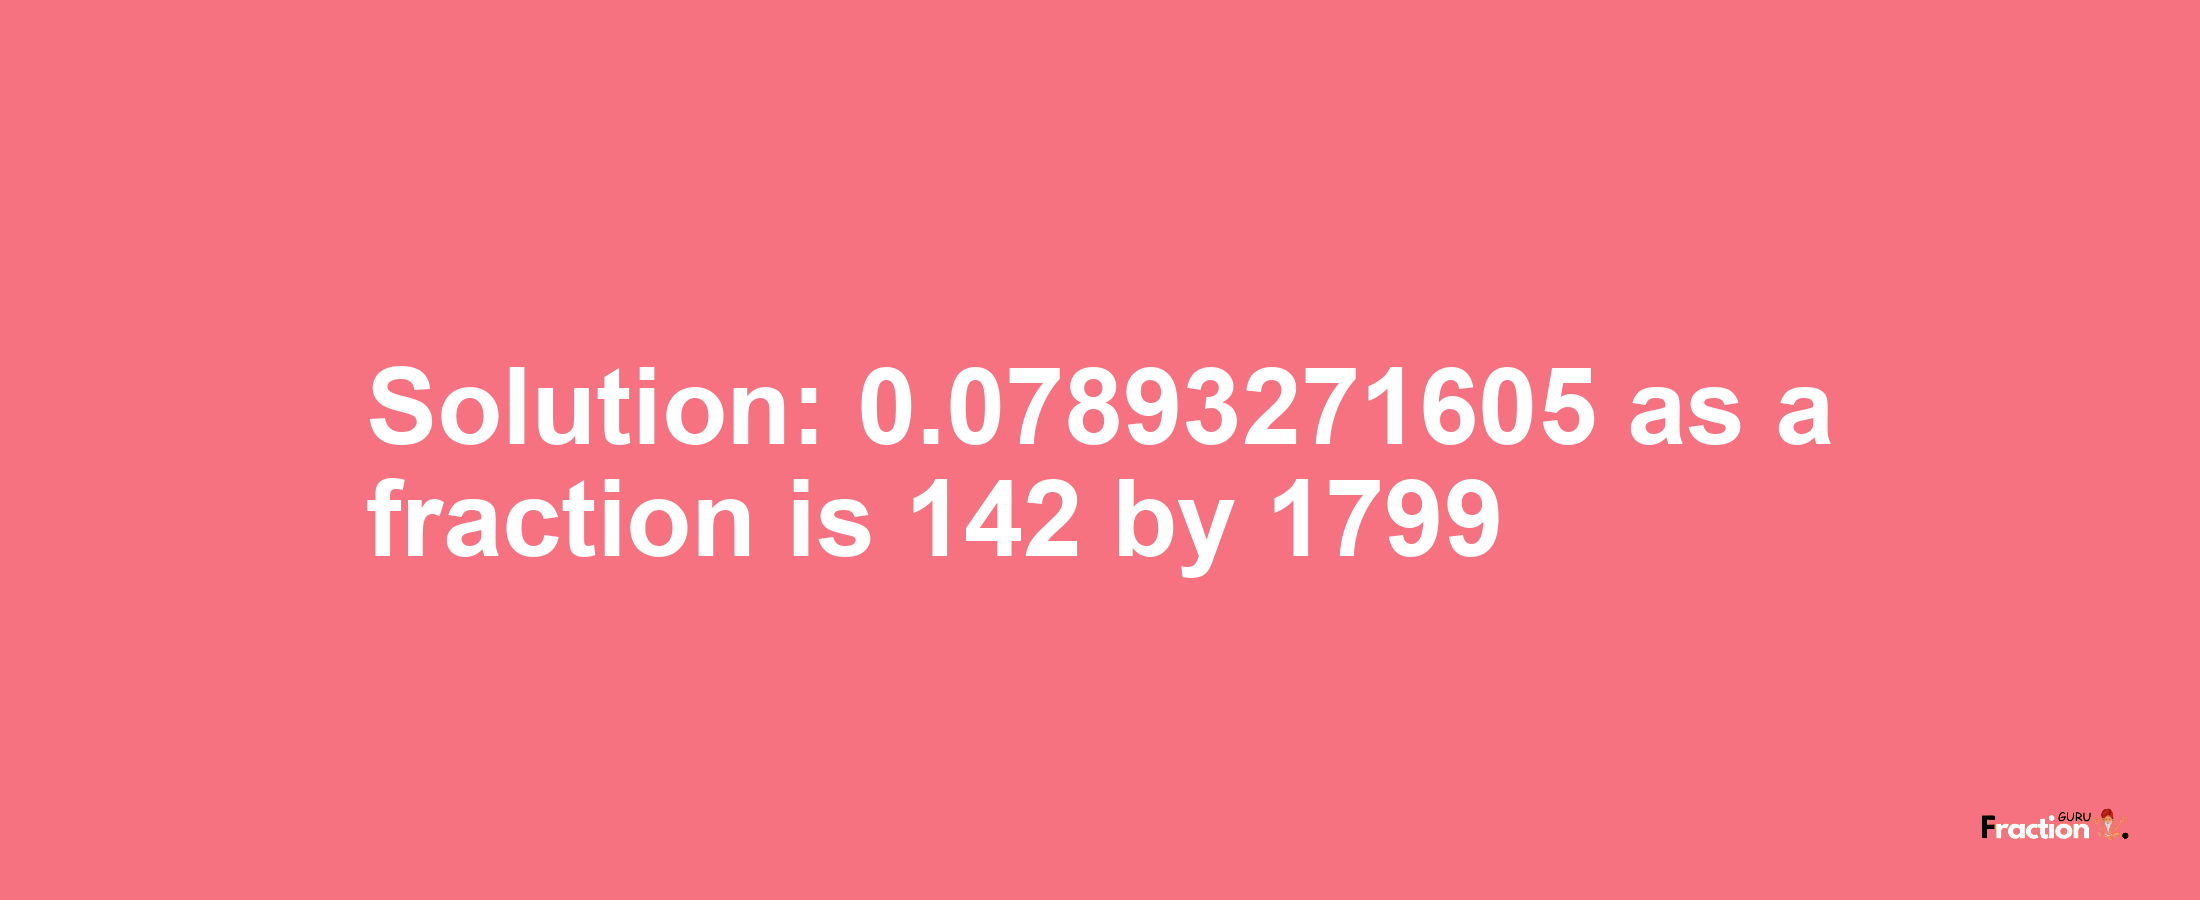 Solution:0.07893271605 as a fraction is 142/1799